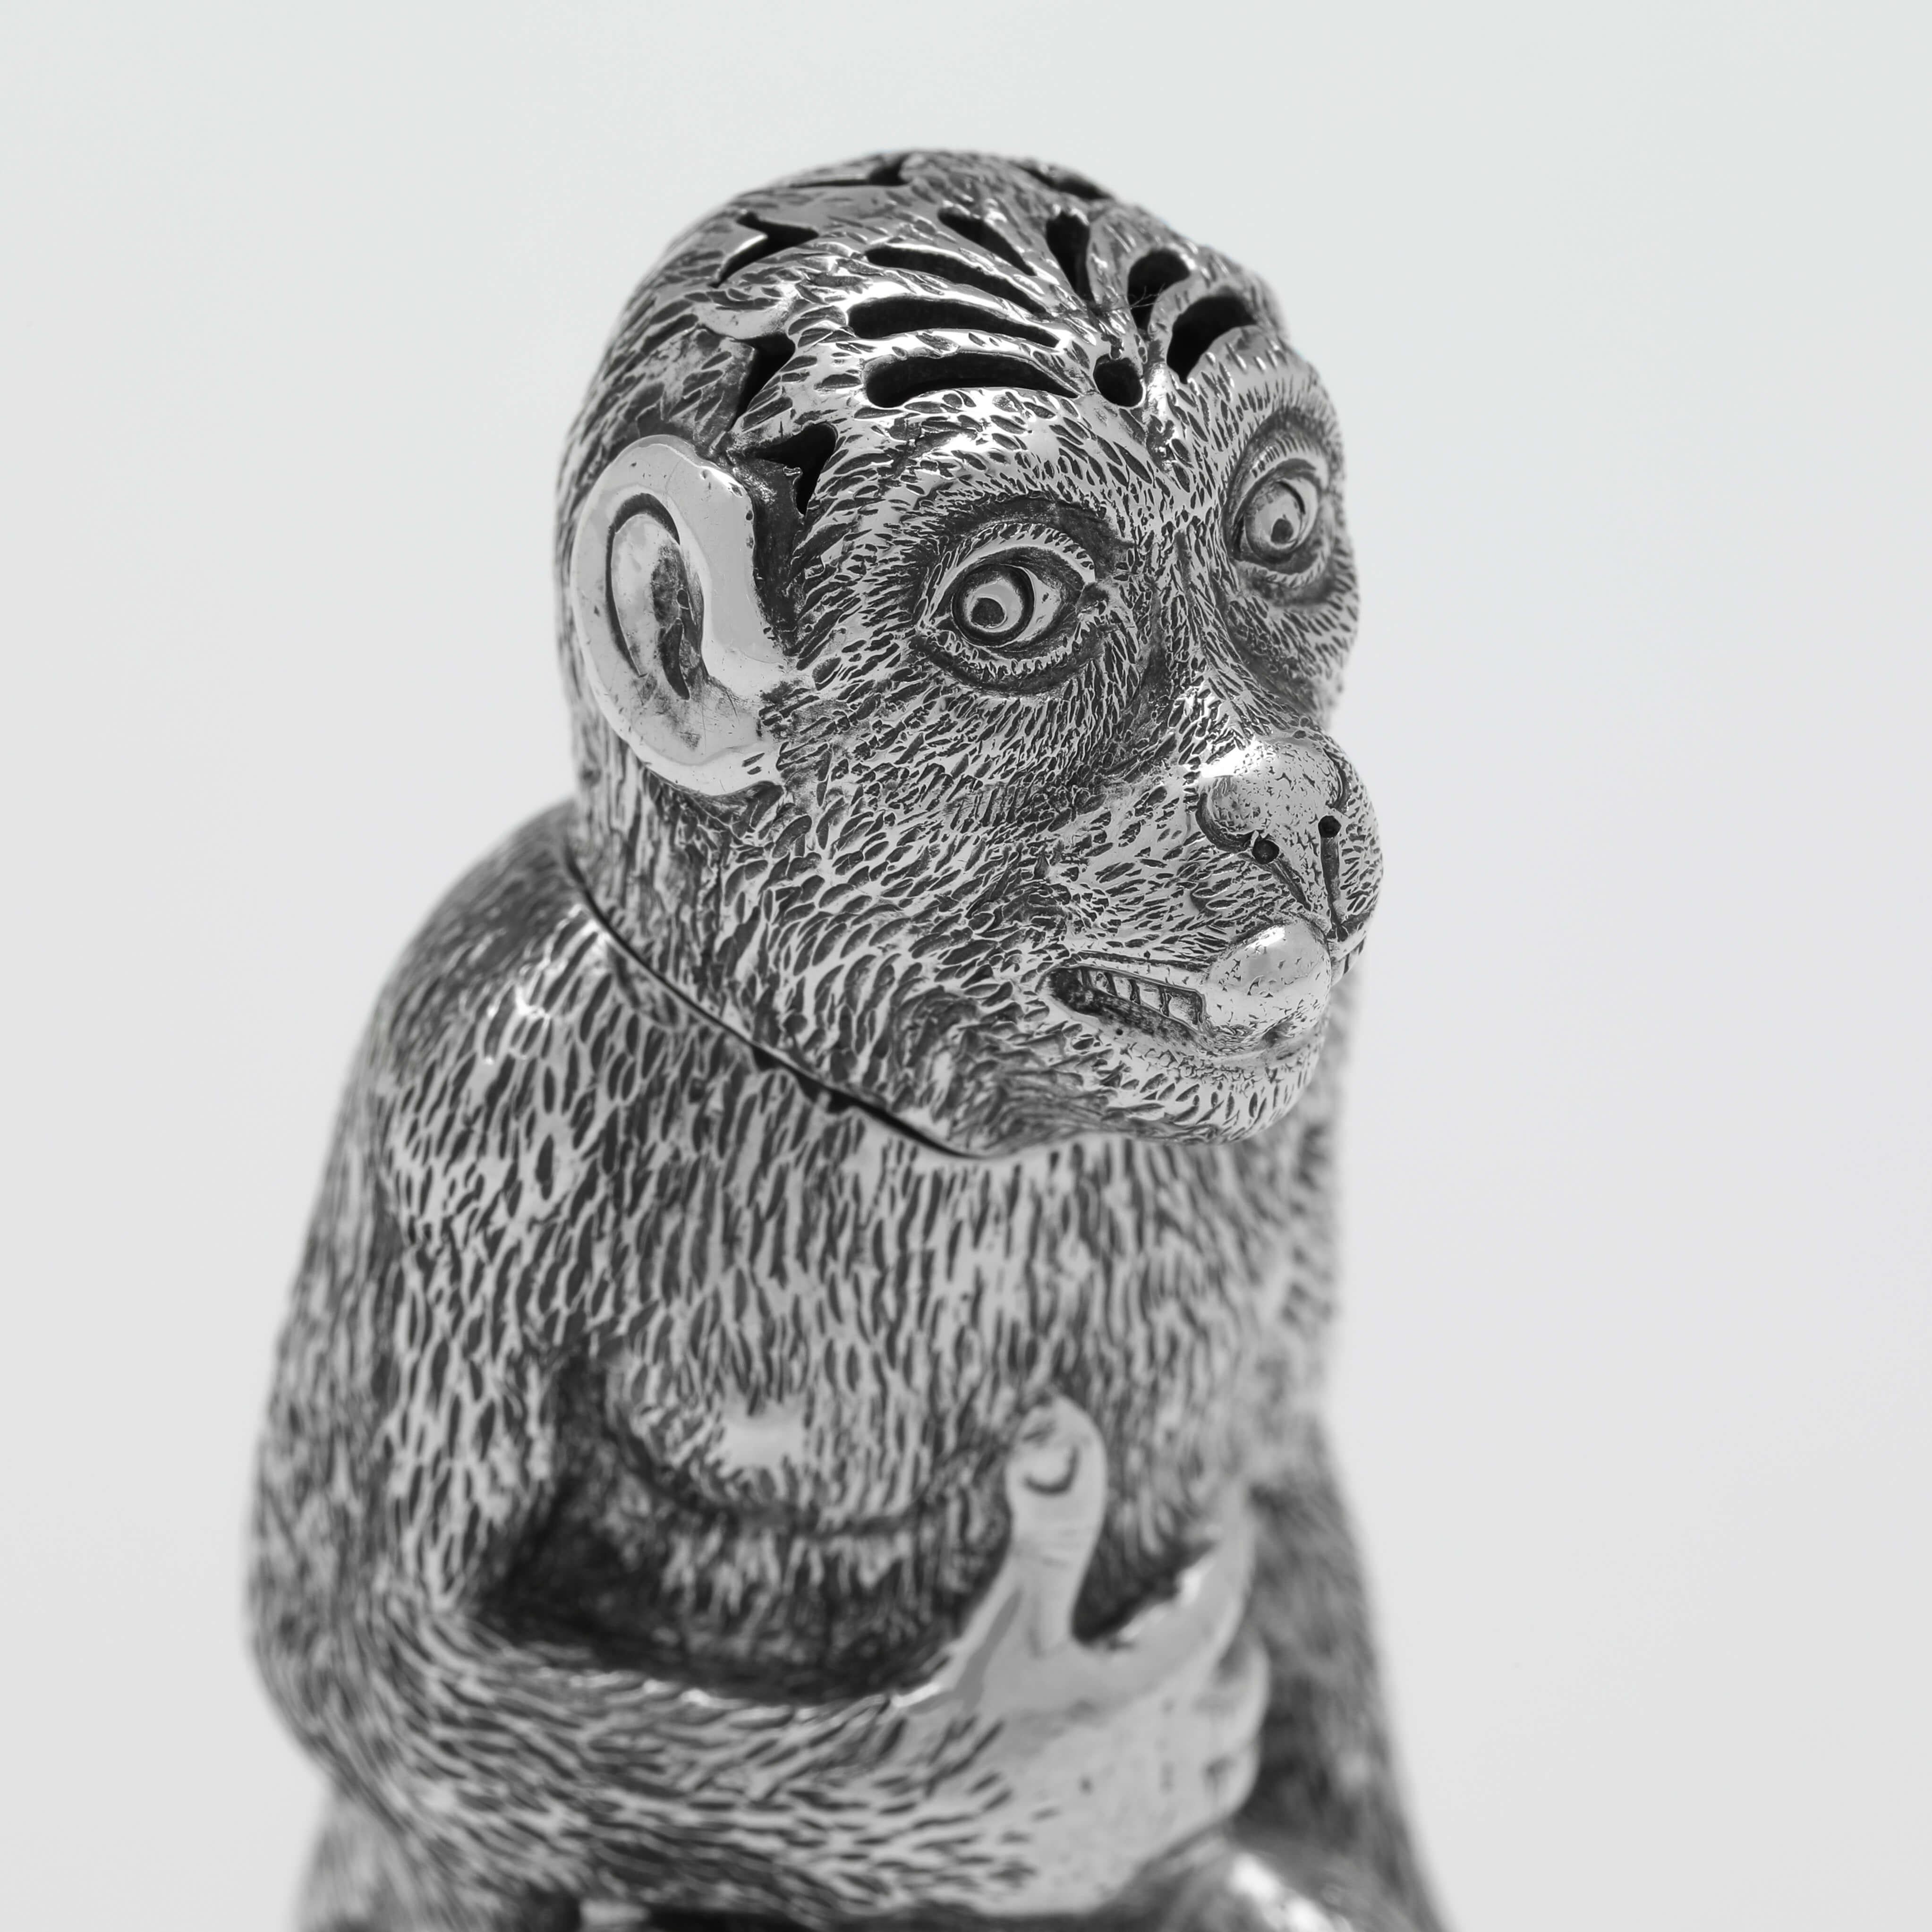 Late 19th Century Very Rare English Antique Sterling Silver Monkey Pepper Pot - London 1881 For Sale